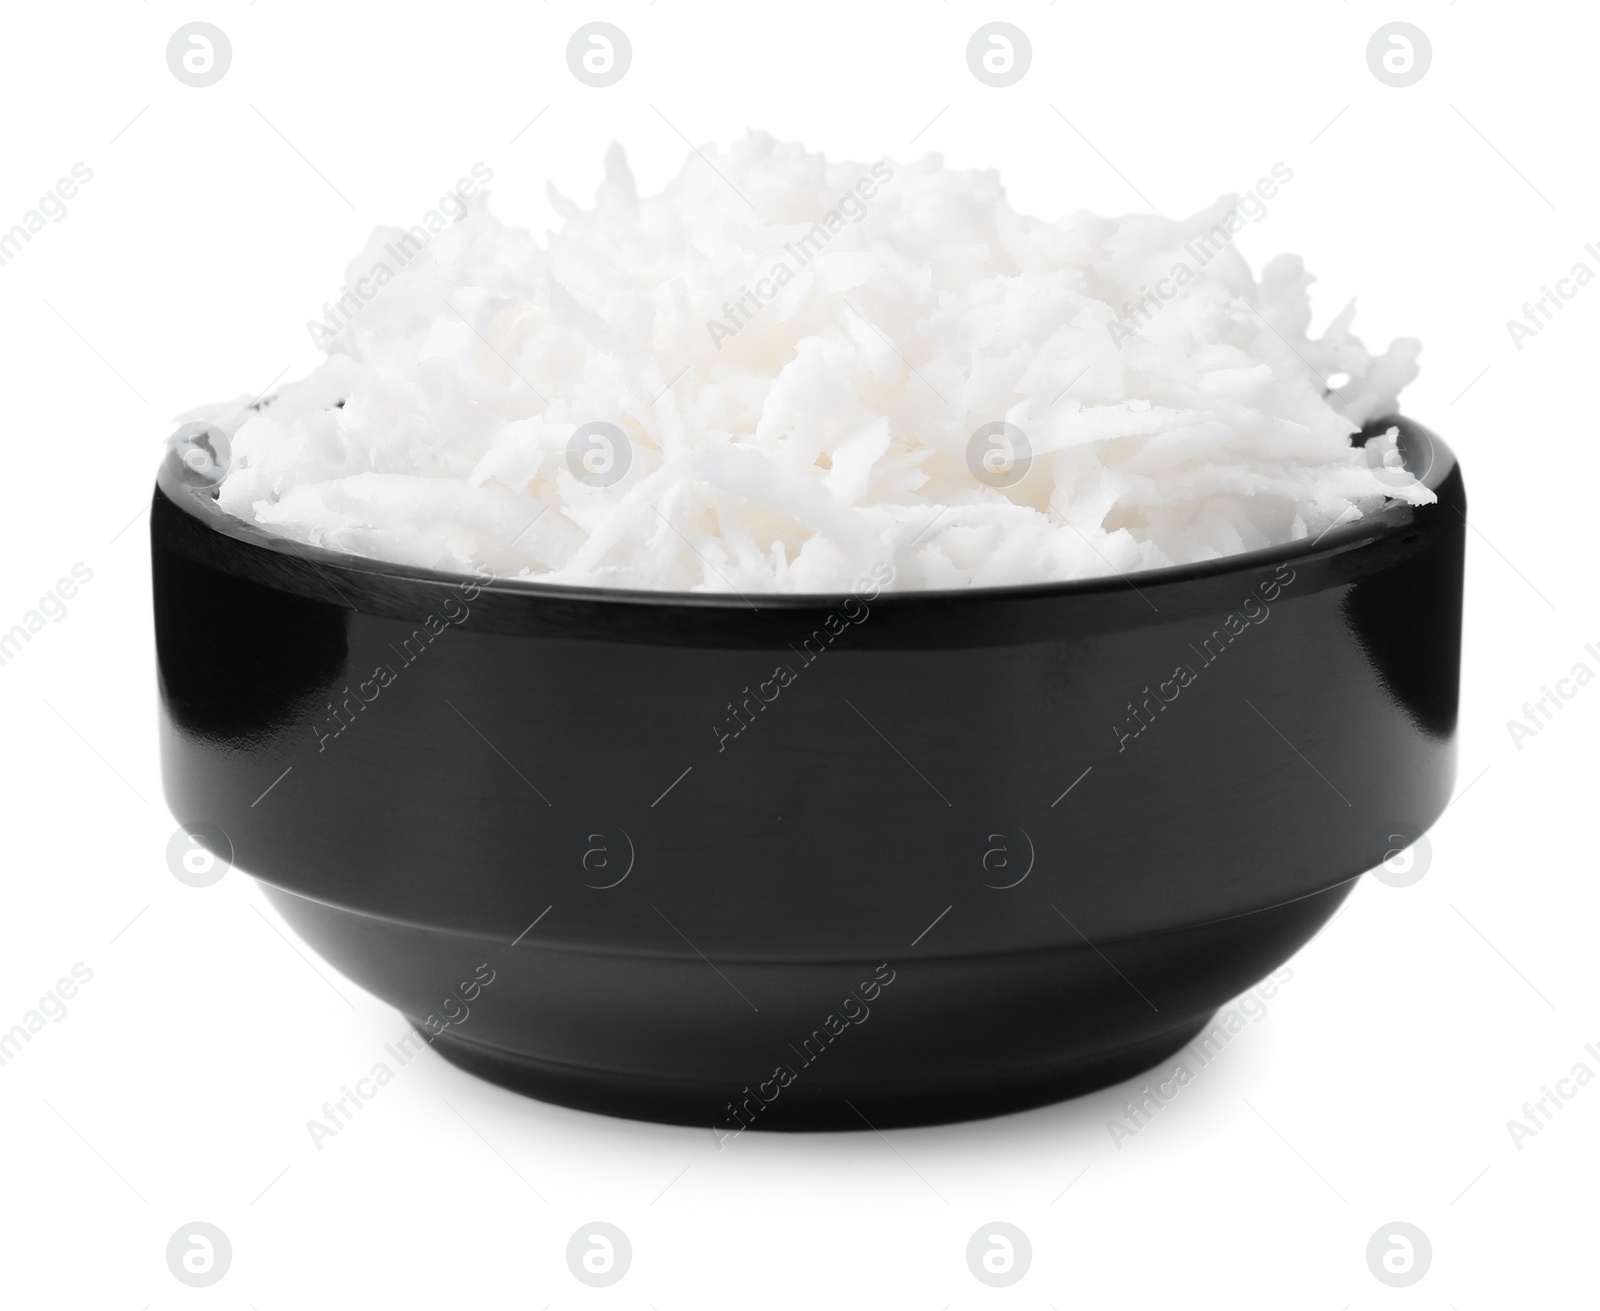 Photo of Coconut flakes in bowl isolated on white